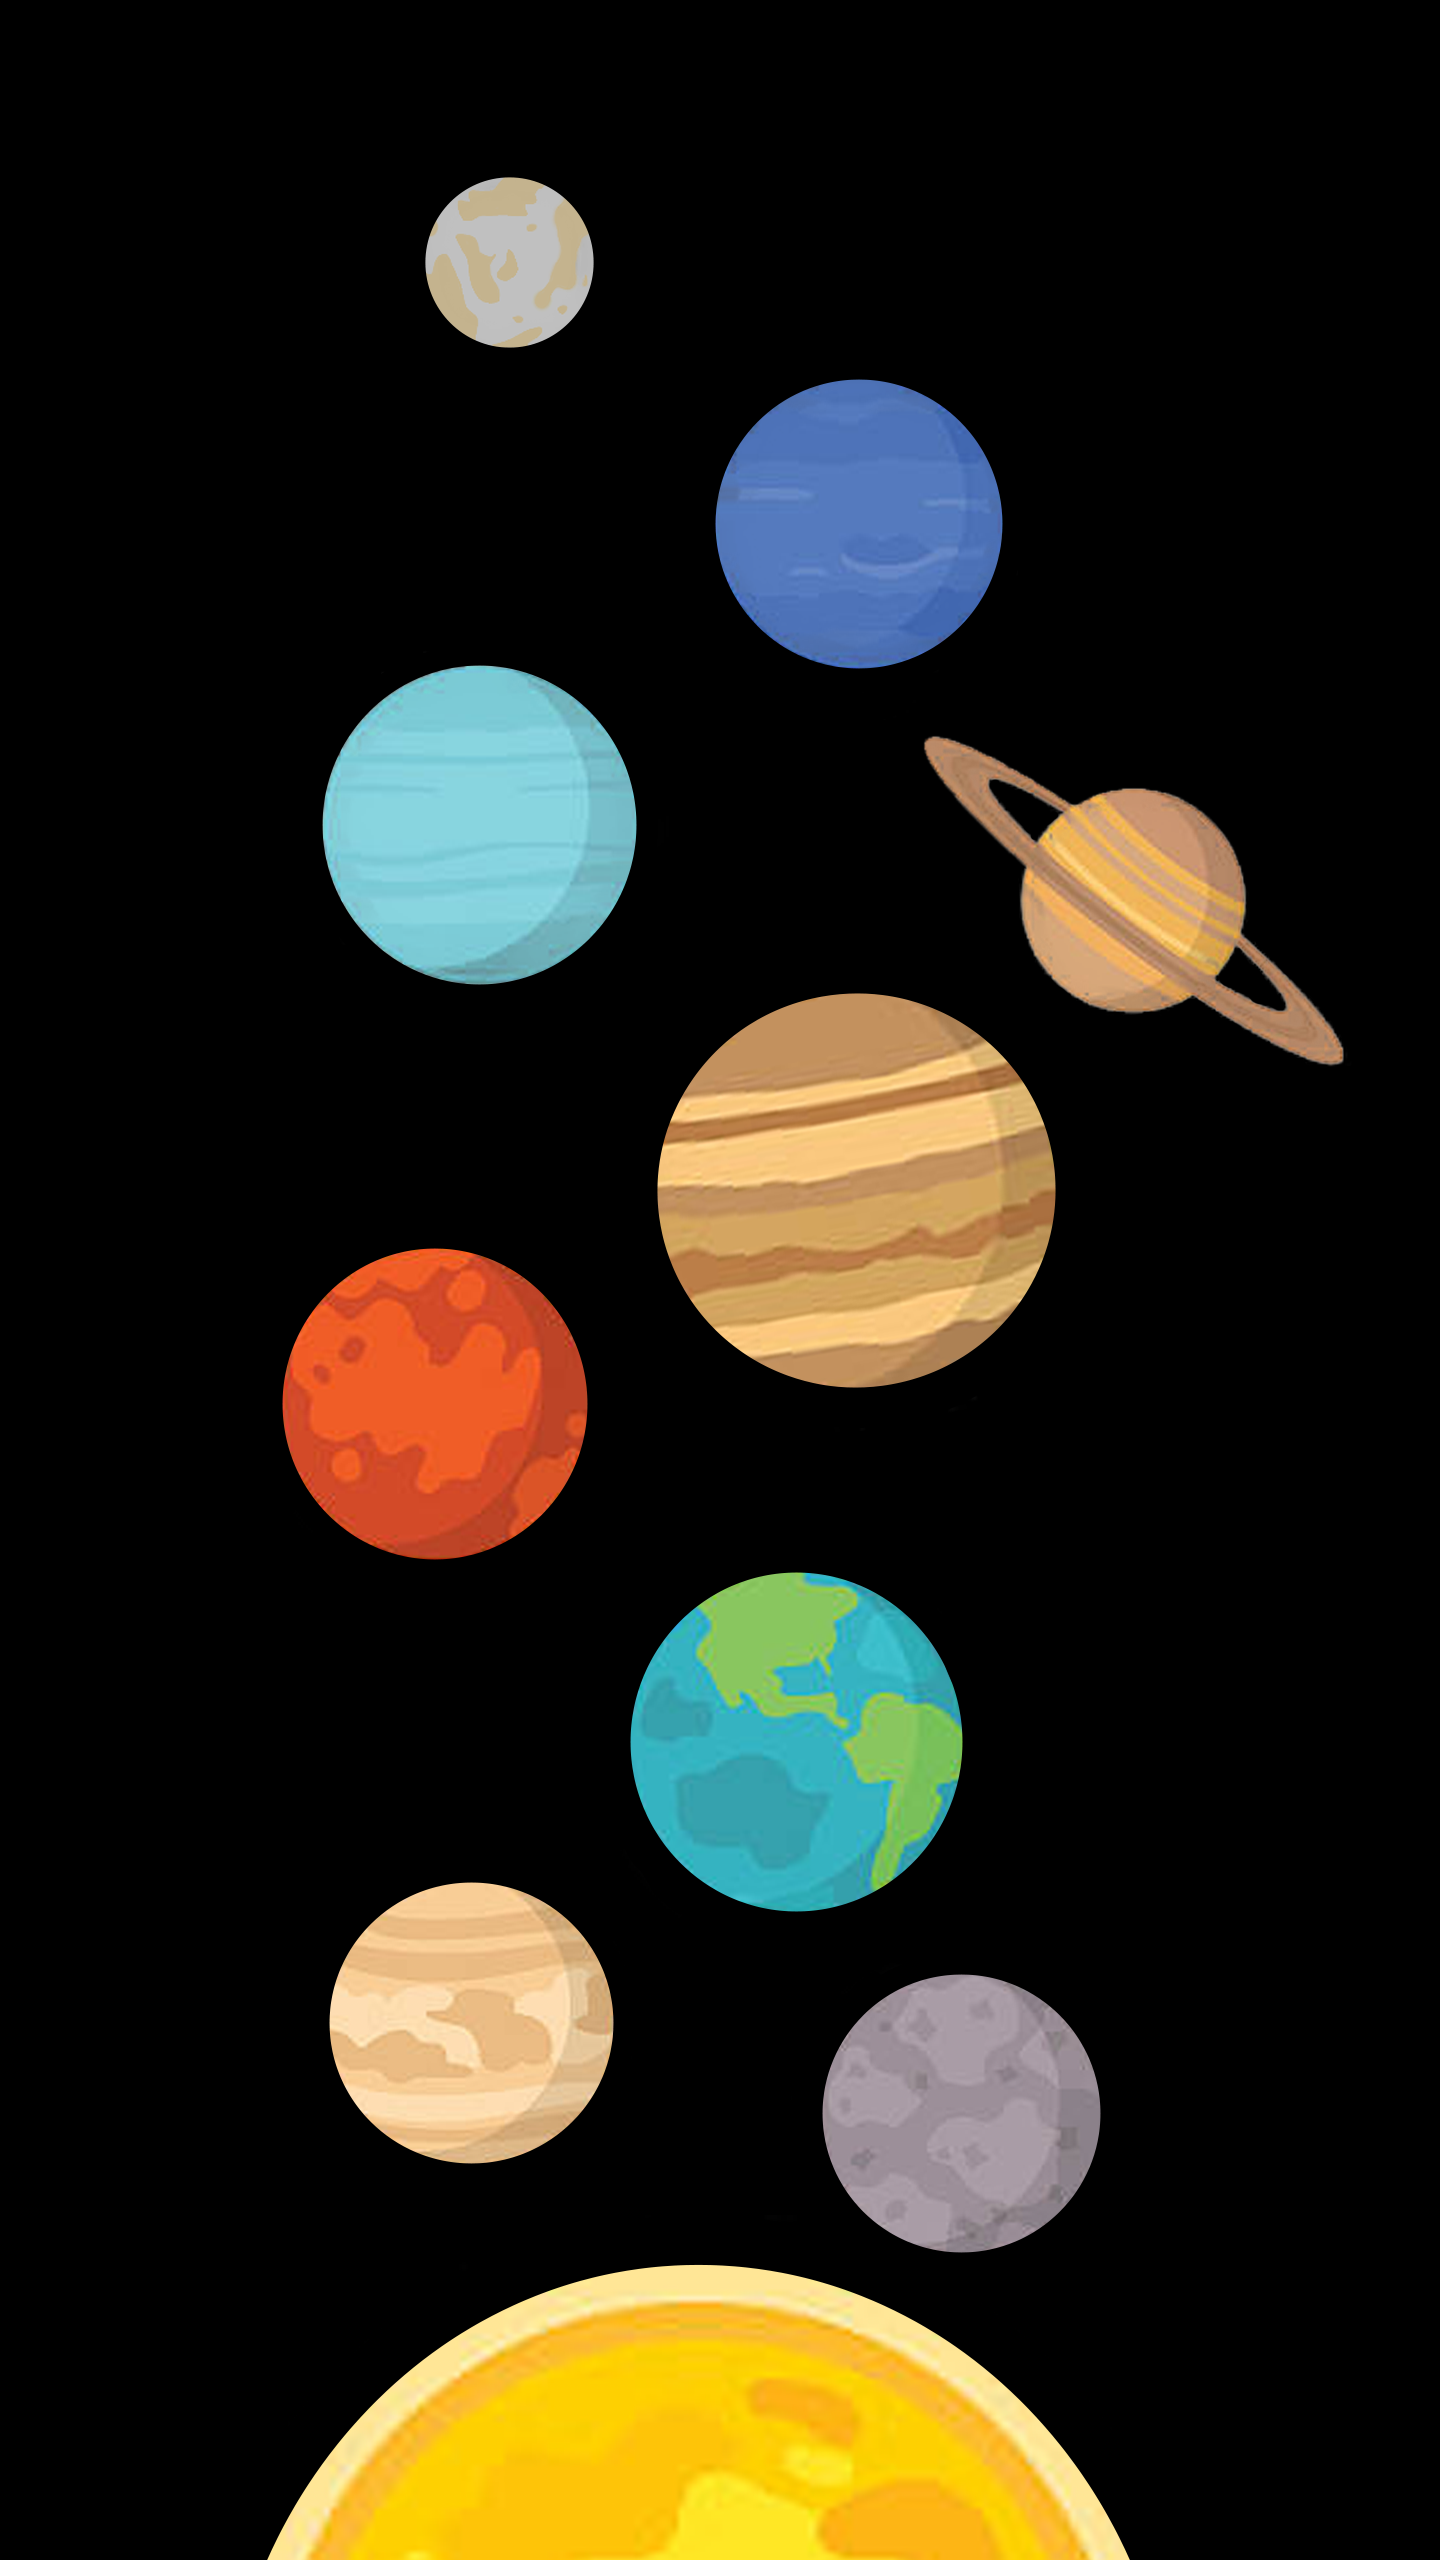 The Solar System AMOLED Wallpaper Made By Yuval Zarchi in Photohop. Israel. Solar system wallpaper, System wallpaper, Solar system art